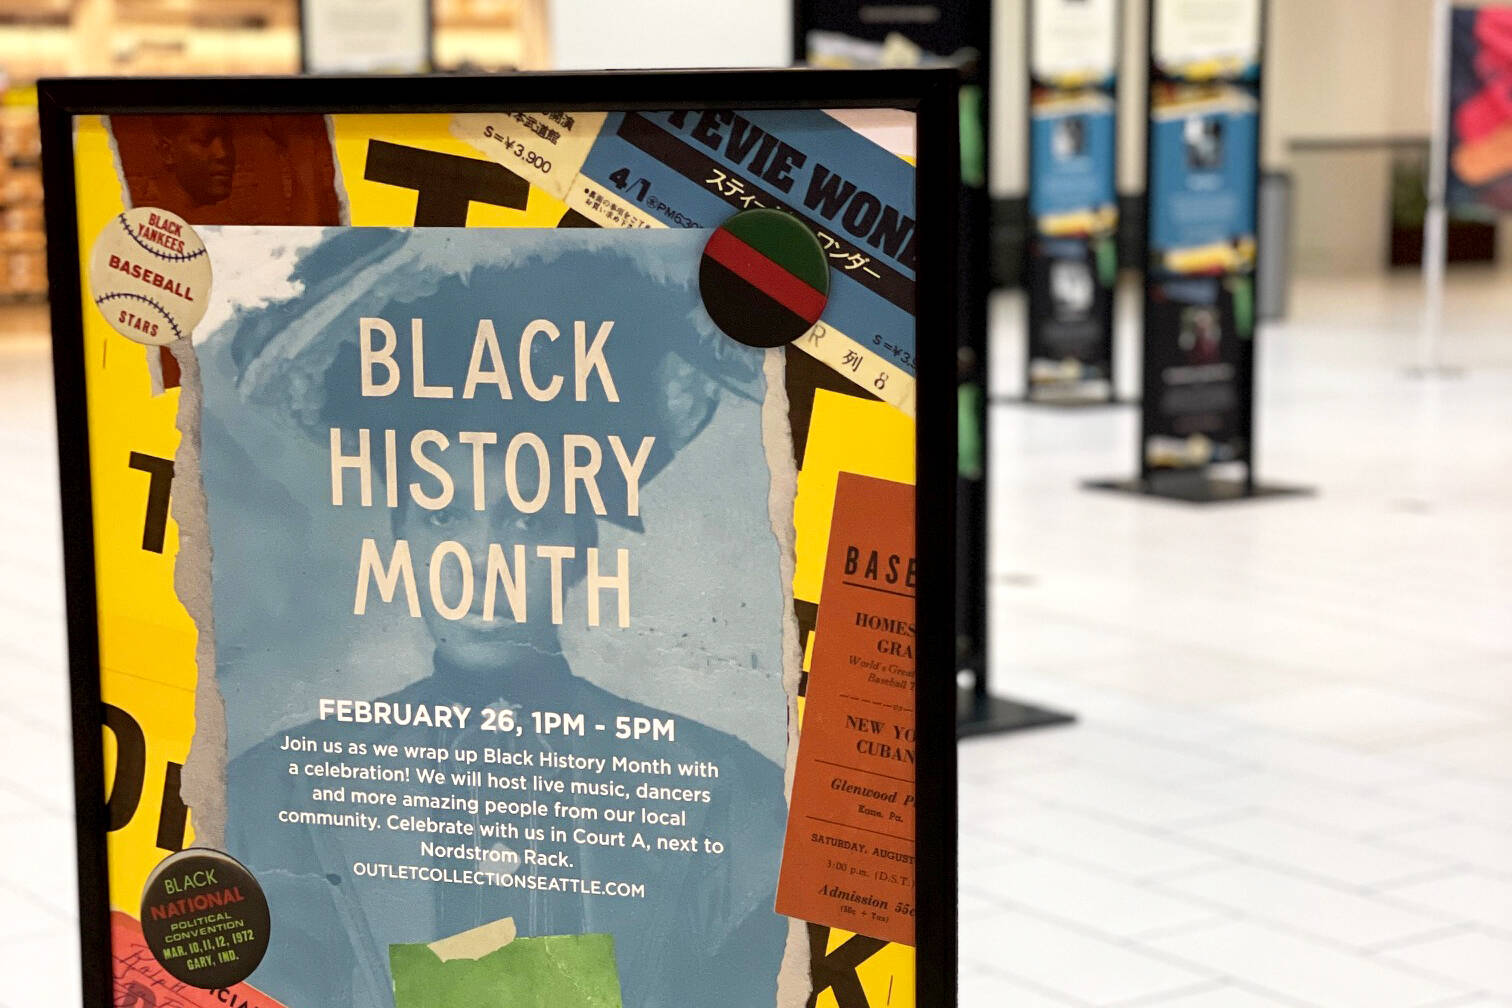 The Outlet Collection | Seattle is honoring Black History Month with a display all month long, and a celebration on Feb. 26!